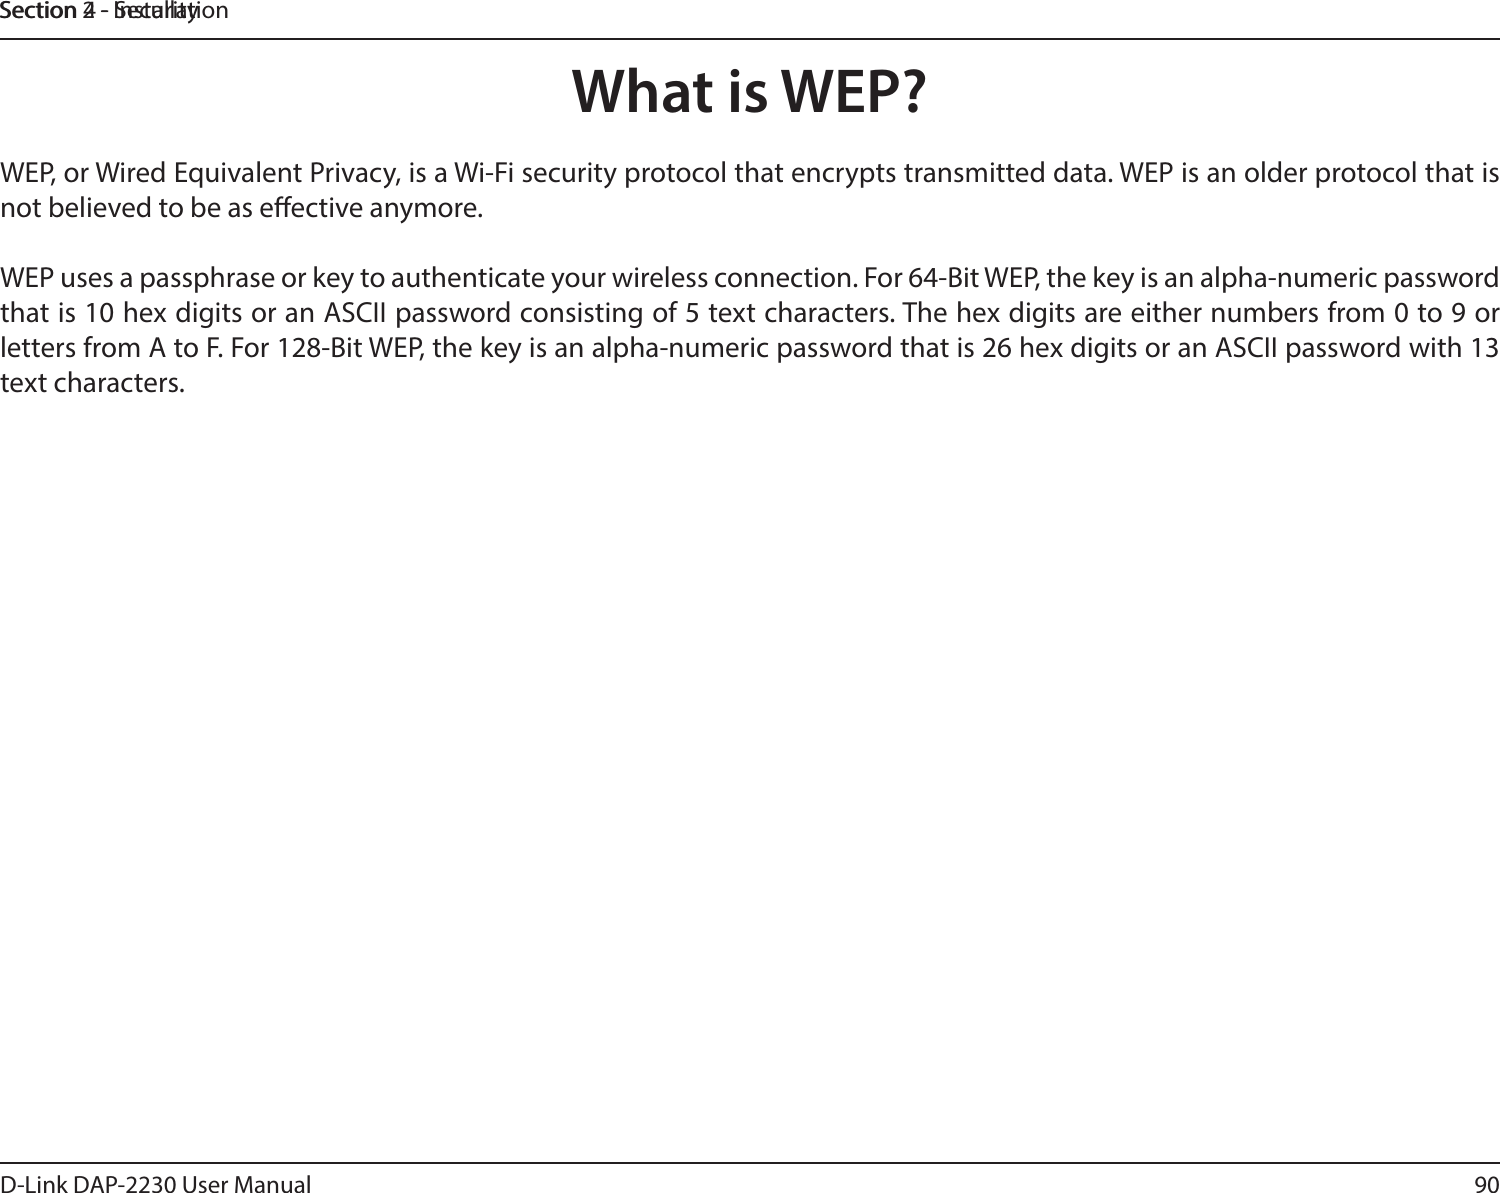 90D-Link DAP-2230 User ManualSection 2 - InstallationSection 4 - SecurityWhat is WEP?WEP, or Wired Equivalent Privacy, is a Wi-Fi security protocol that encrypts transmitted data. WEP is an older protocol that is not believed to be as eective anymore. WEP uses a passphrase or key to authenticate your wireless connection. For 64-Bit WEP, the key is an alpha-numeric password that is 10 hex digits or an ASCII password consisting of 5 text characters. The hex digits are either numbers from 0 to 9 or letters from A to F. For 128-Bit WEP, the key is an alpha-numeric password that is 26 hex digits or an ASCII password with 13 text characters. 